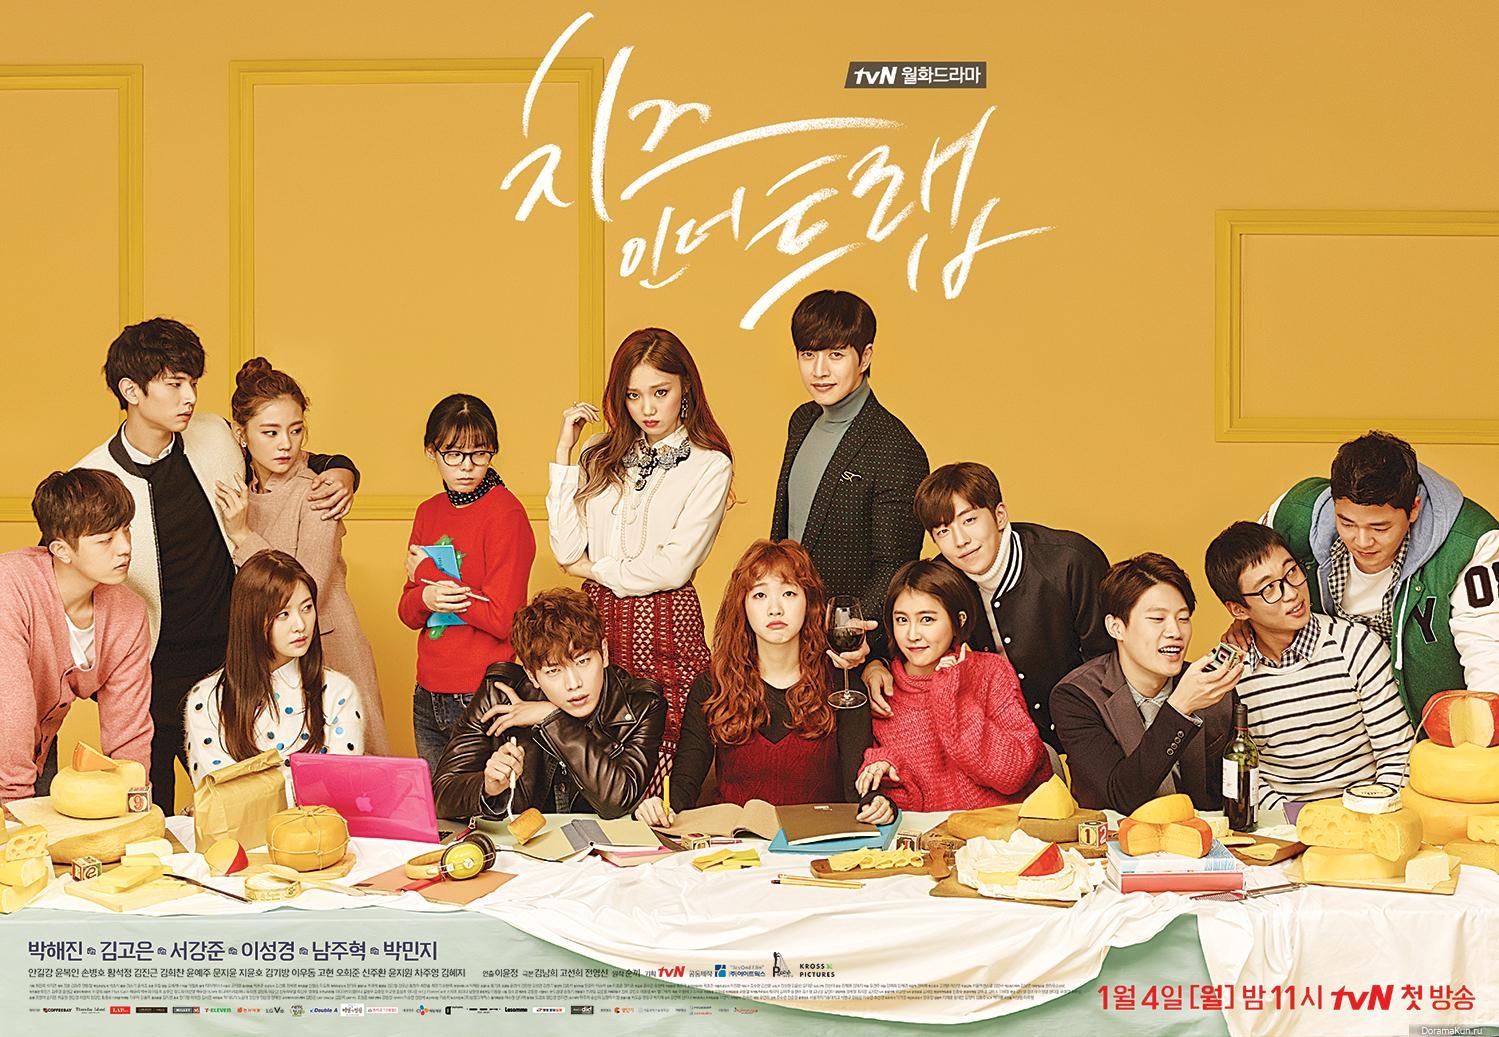 Сыр в мышеловке/Cheese in the trap (2016) - Страница 2 Cheese-in-the-Trap-Poster4-1499